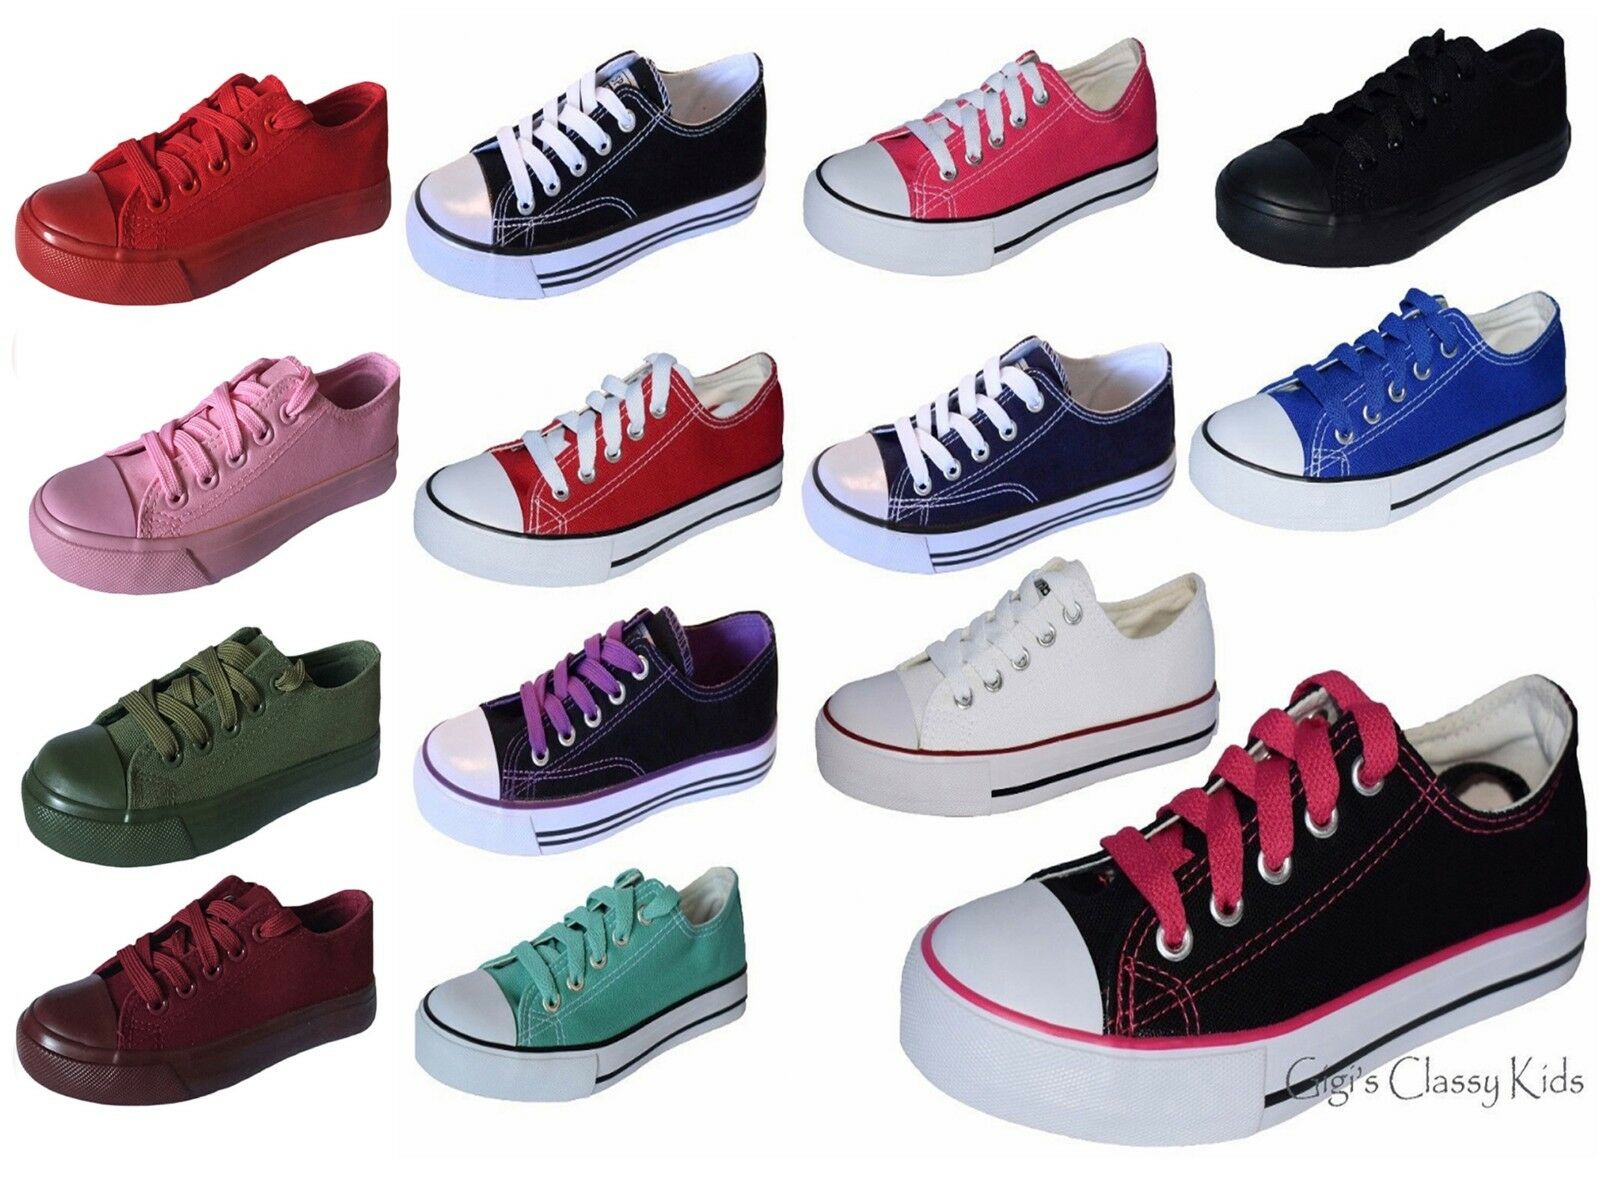 New Boys Girls Youth Classic Low Top Canvas Tennis Shoes Lace Up Sneakers Kids